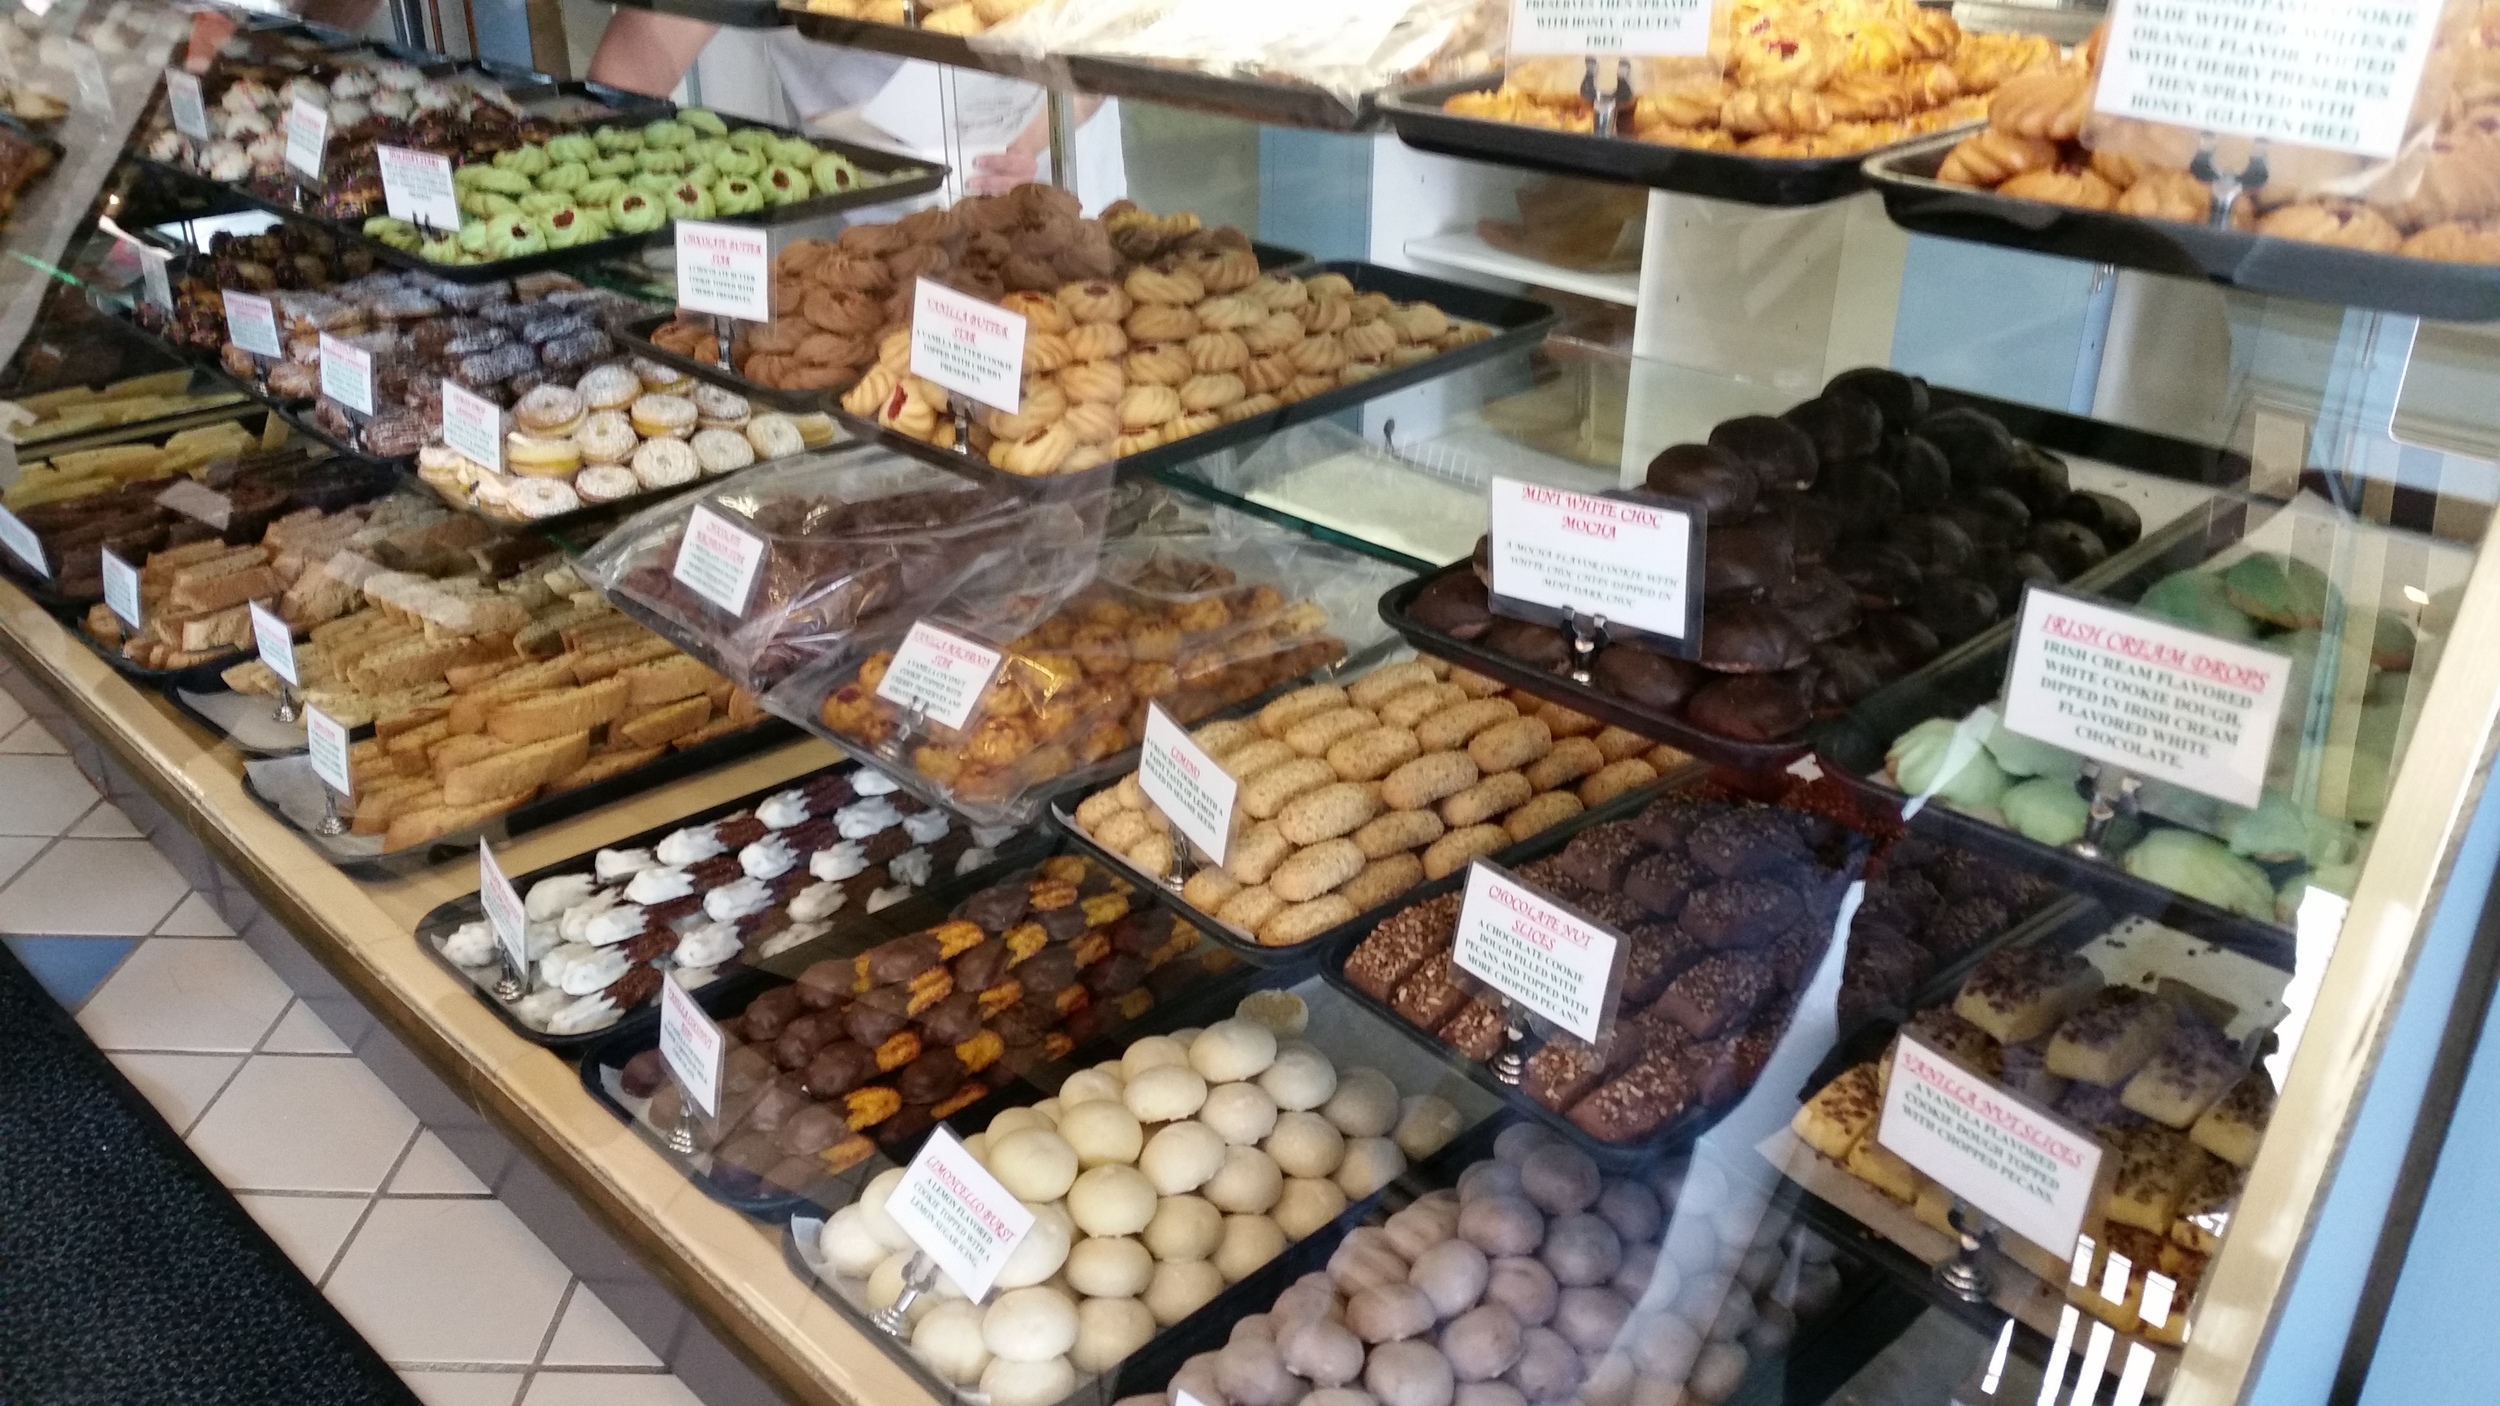  As always, a wide selection of delicious Italian treats await customers at Peter Sciortino's Bakery 